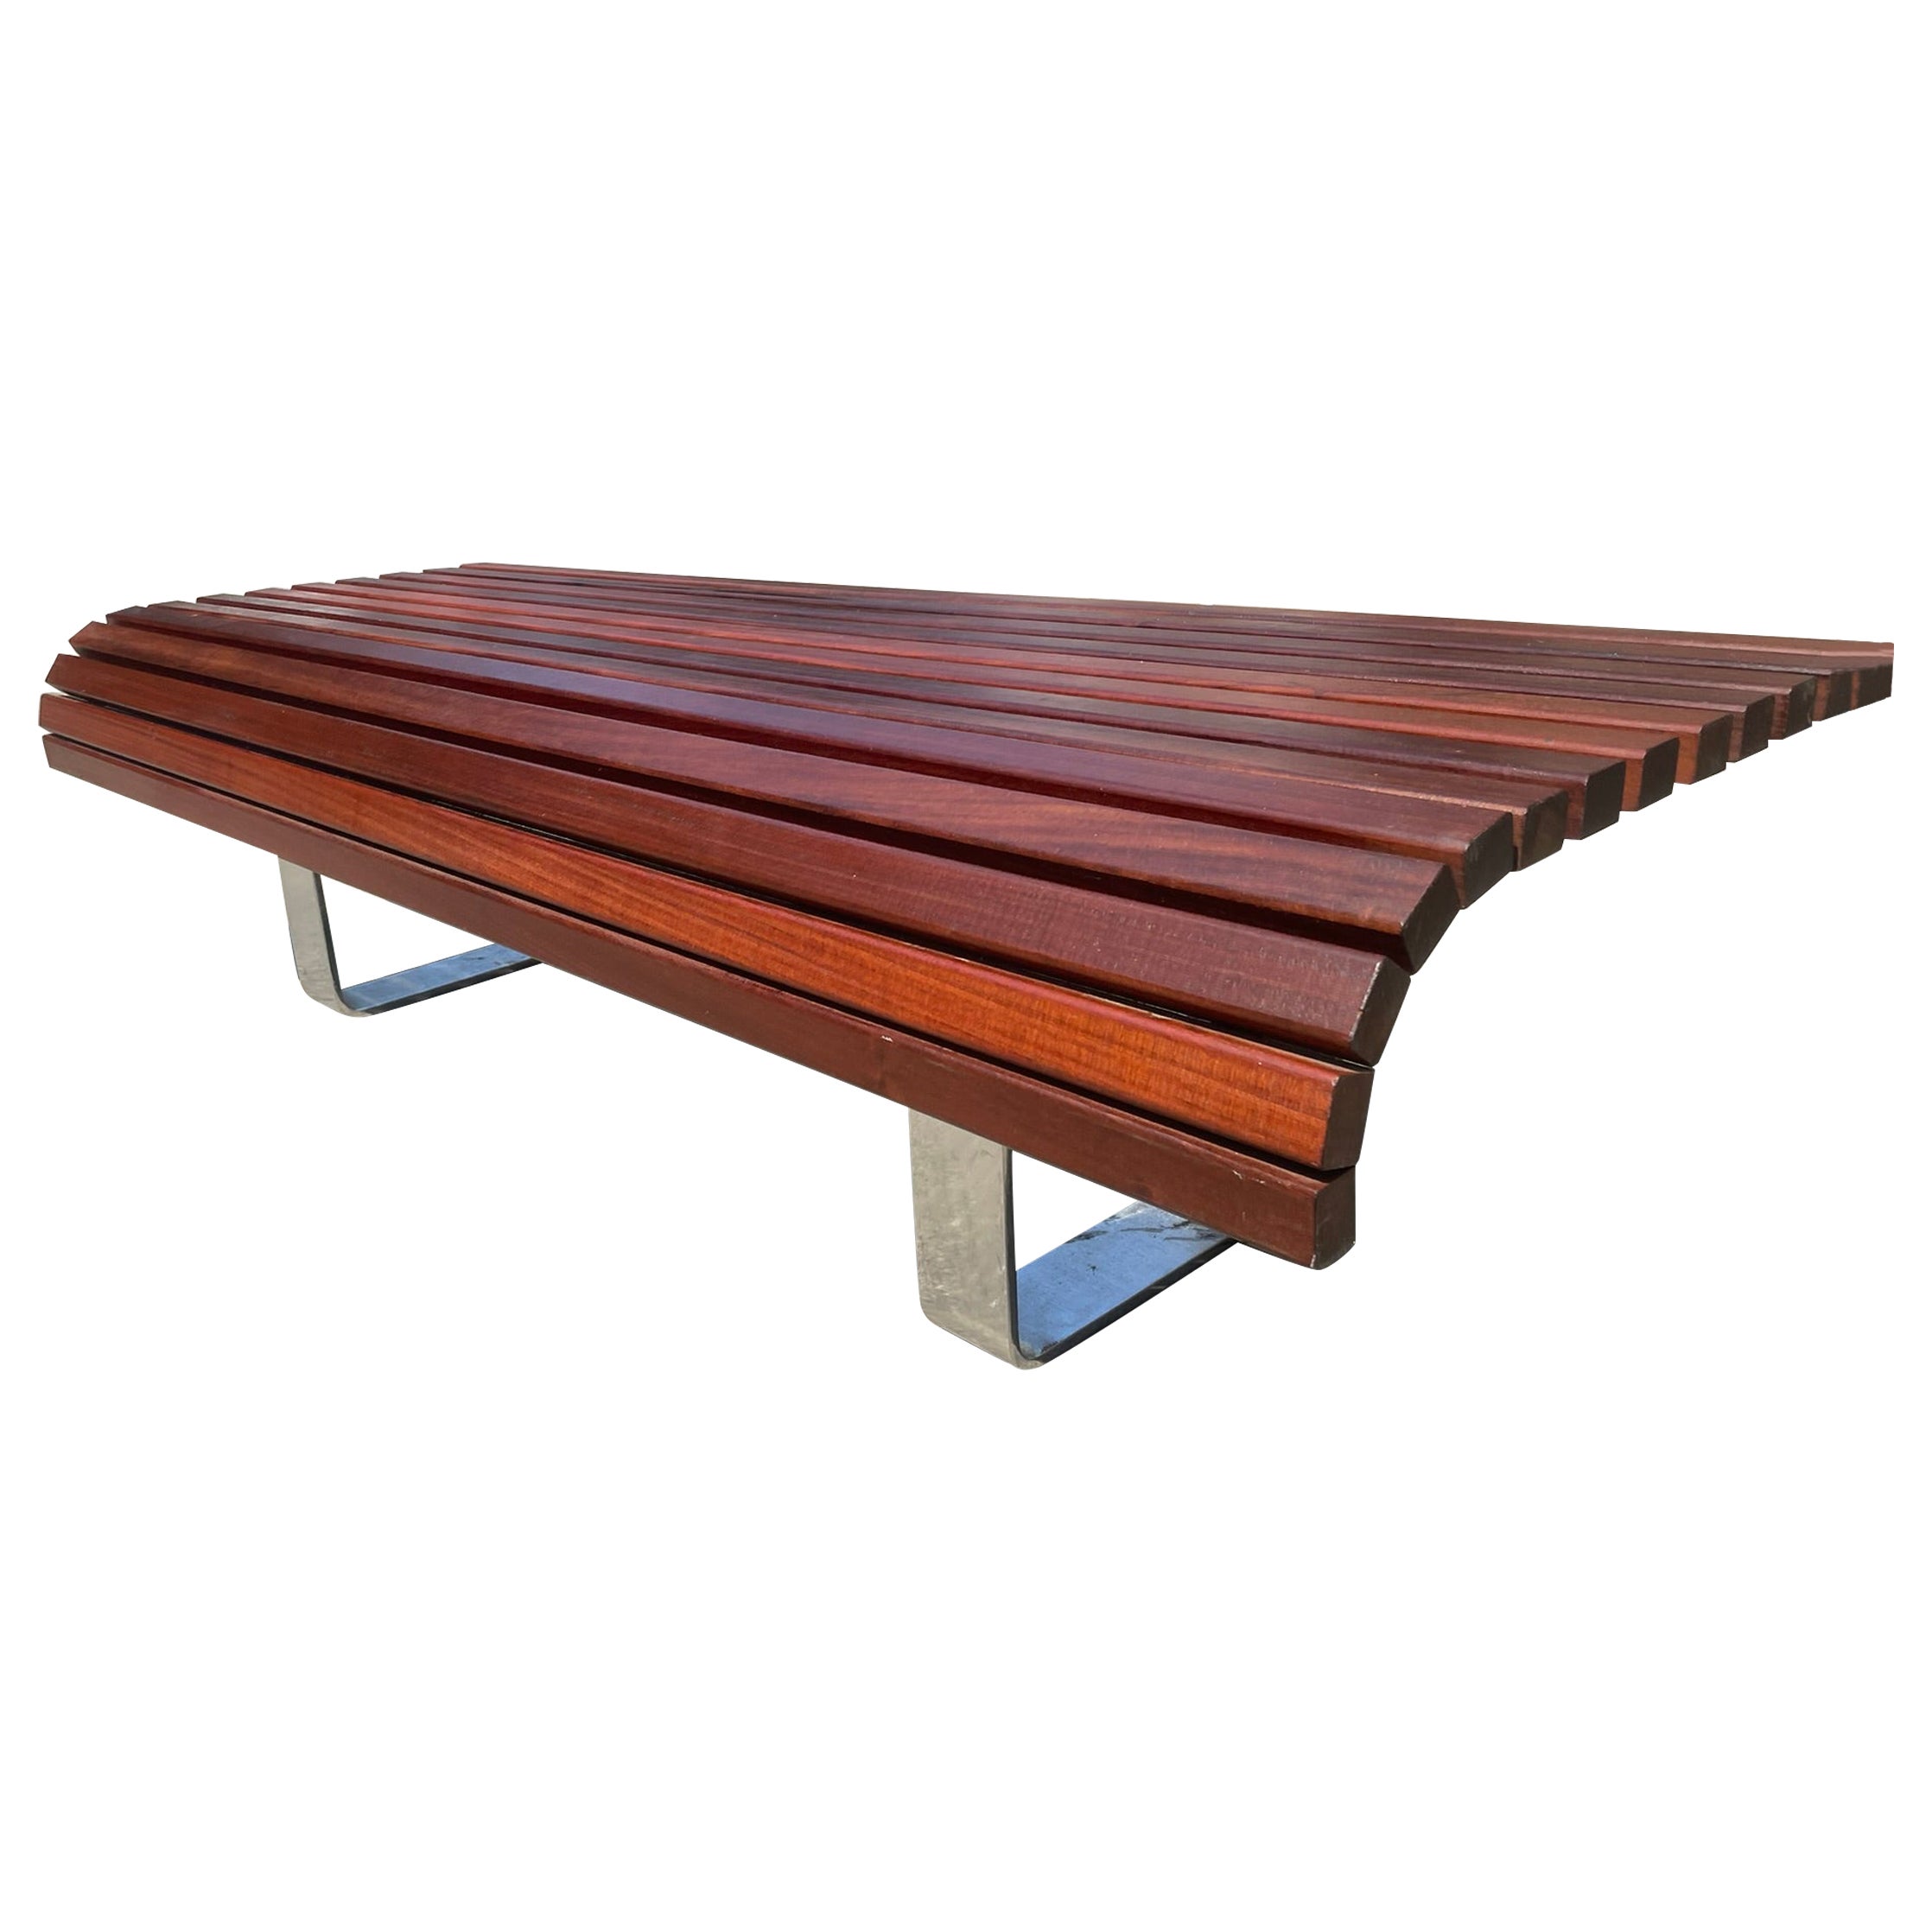 Redwood Mid Century Modern Wood Slat Coffee Table / Bench For Sale